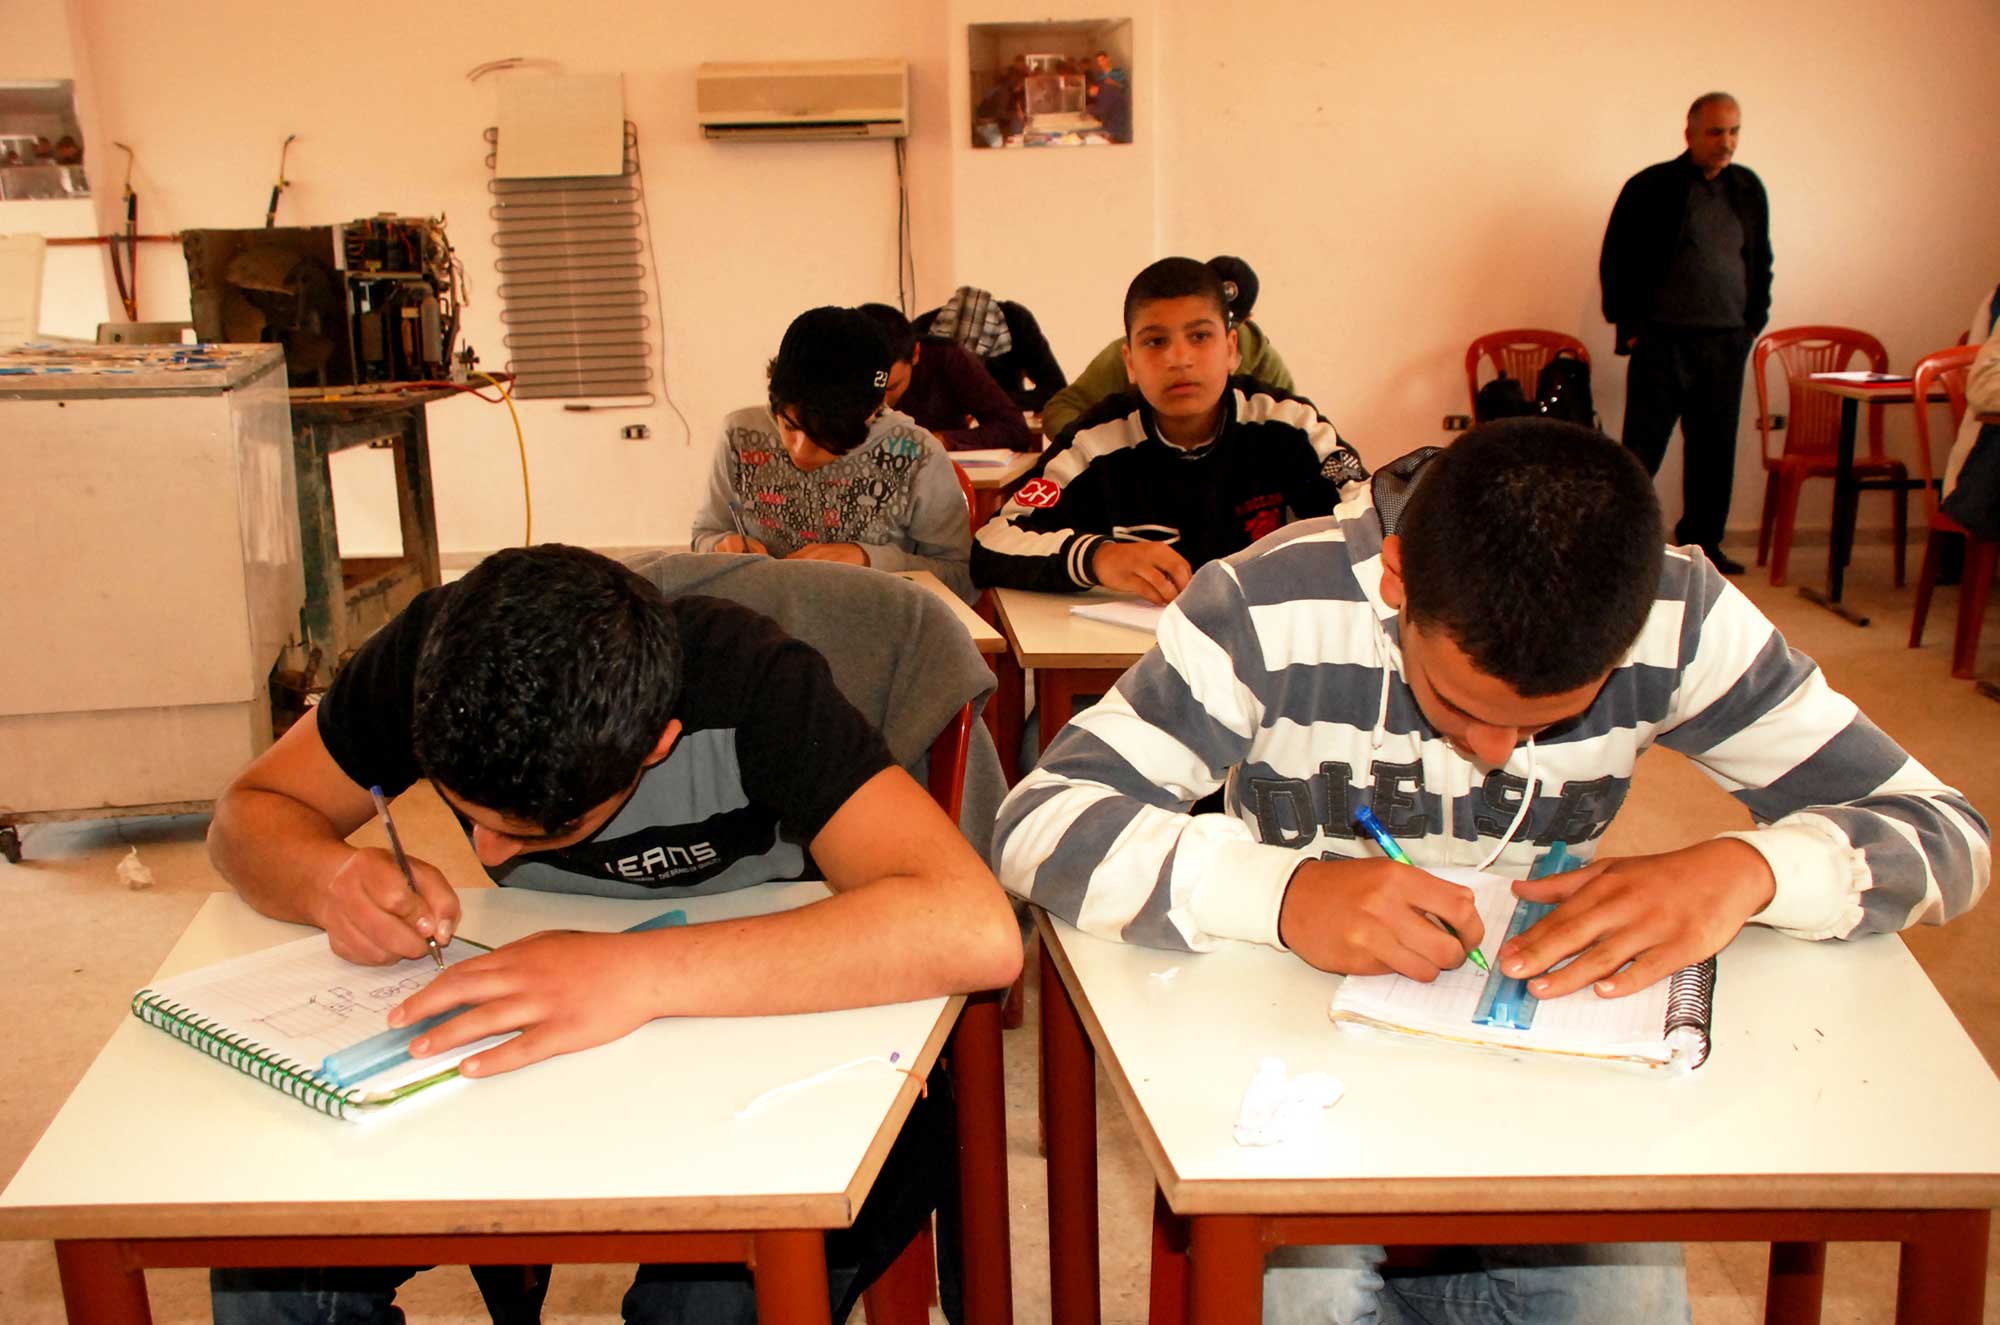 Anera education programs in Lebanon camps help youth expand their academic and economic opportunities